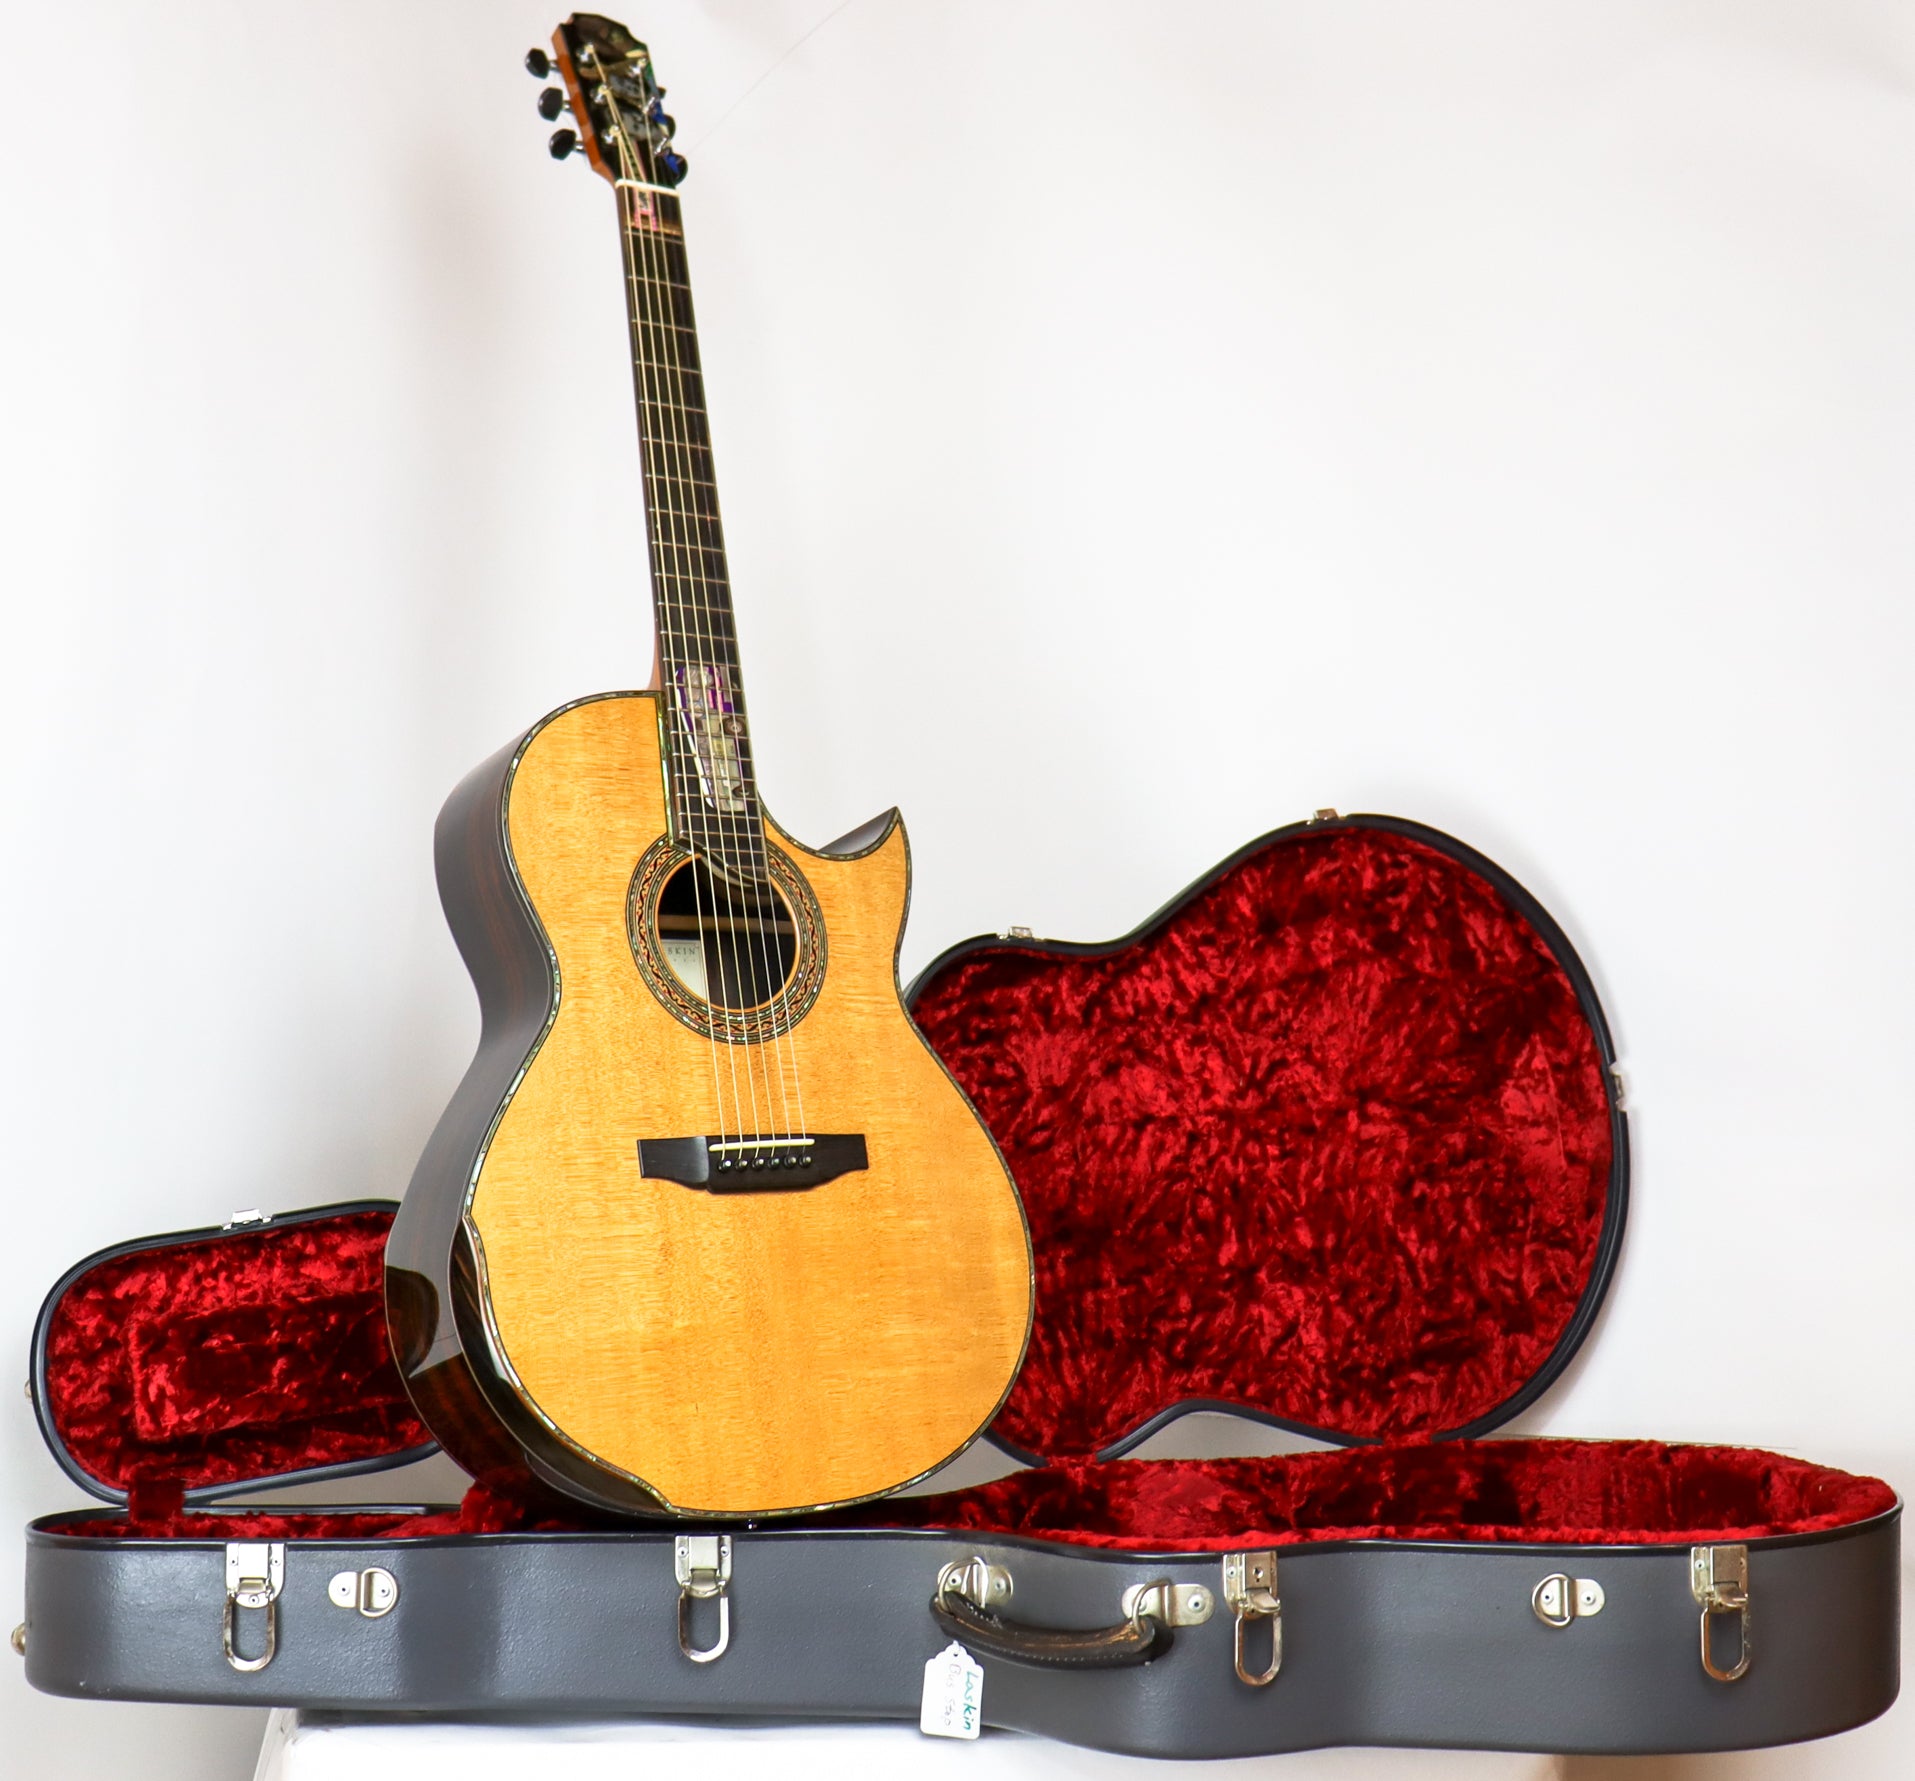 Laskin 1996 Custom Acoustic with Pearl Inlays